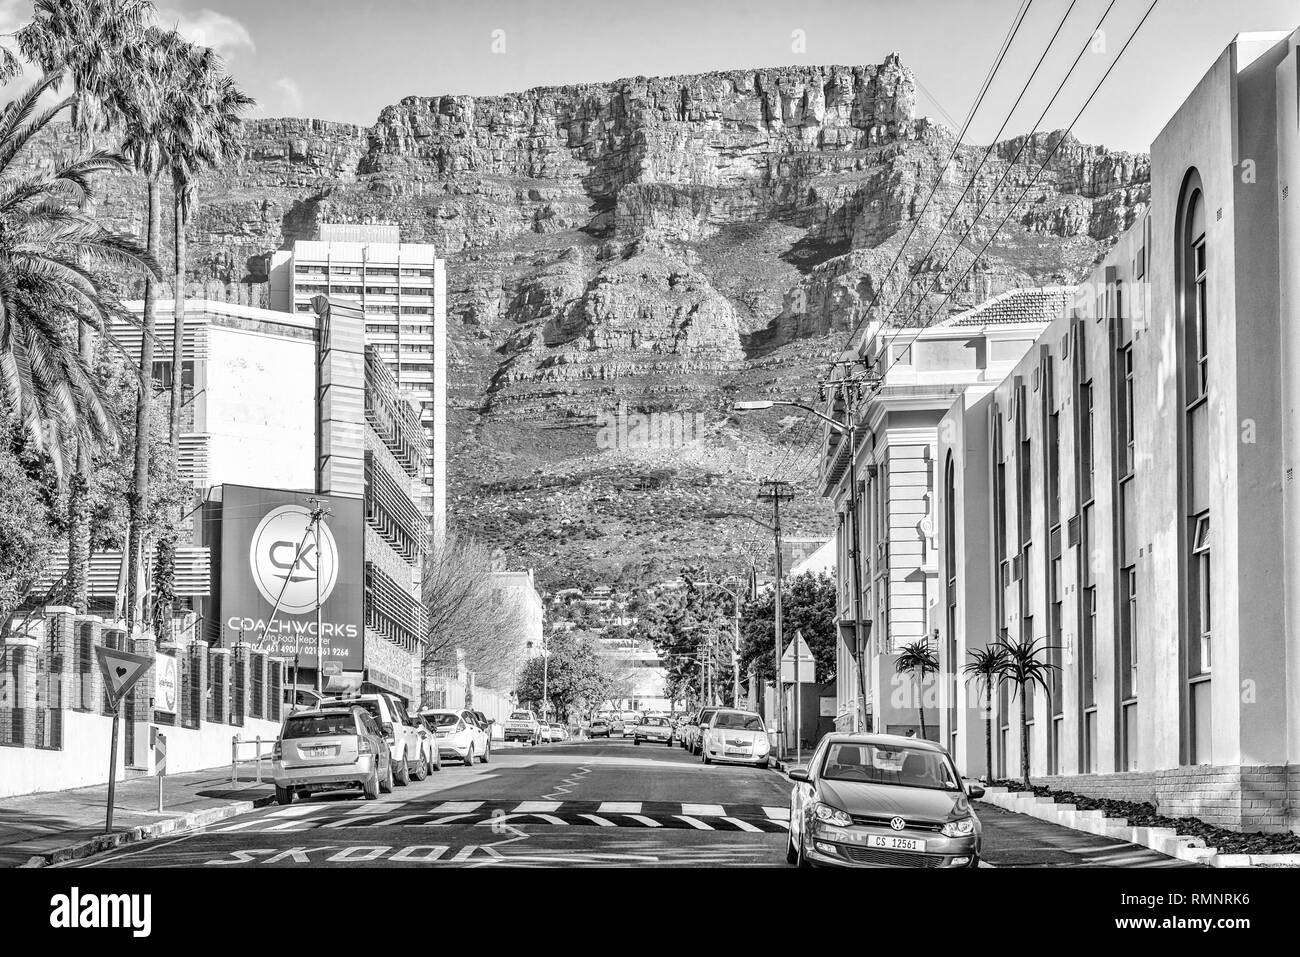 CAPE TOWN, SOUTH AFRICA, AUGUST 17, 2018: A view of Hope Street in Cape Town. Vehicles, Table Mountain and the upper cable station are visible. Monoch Stock Photo